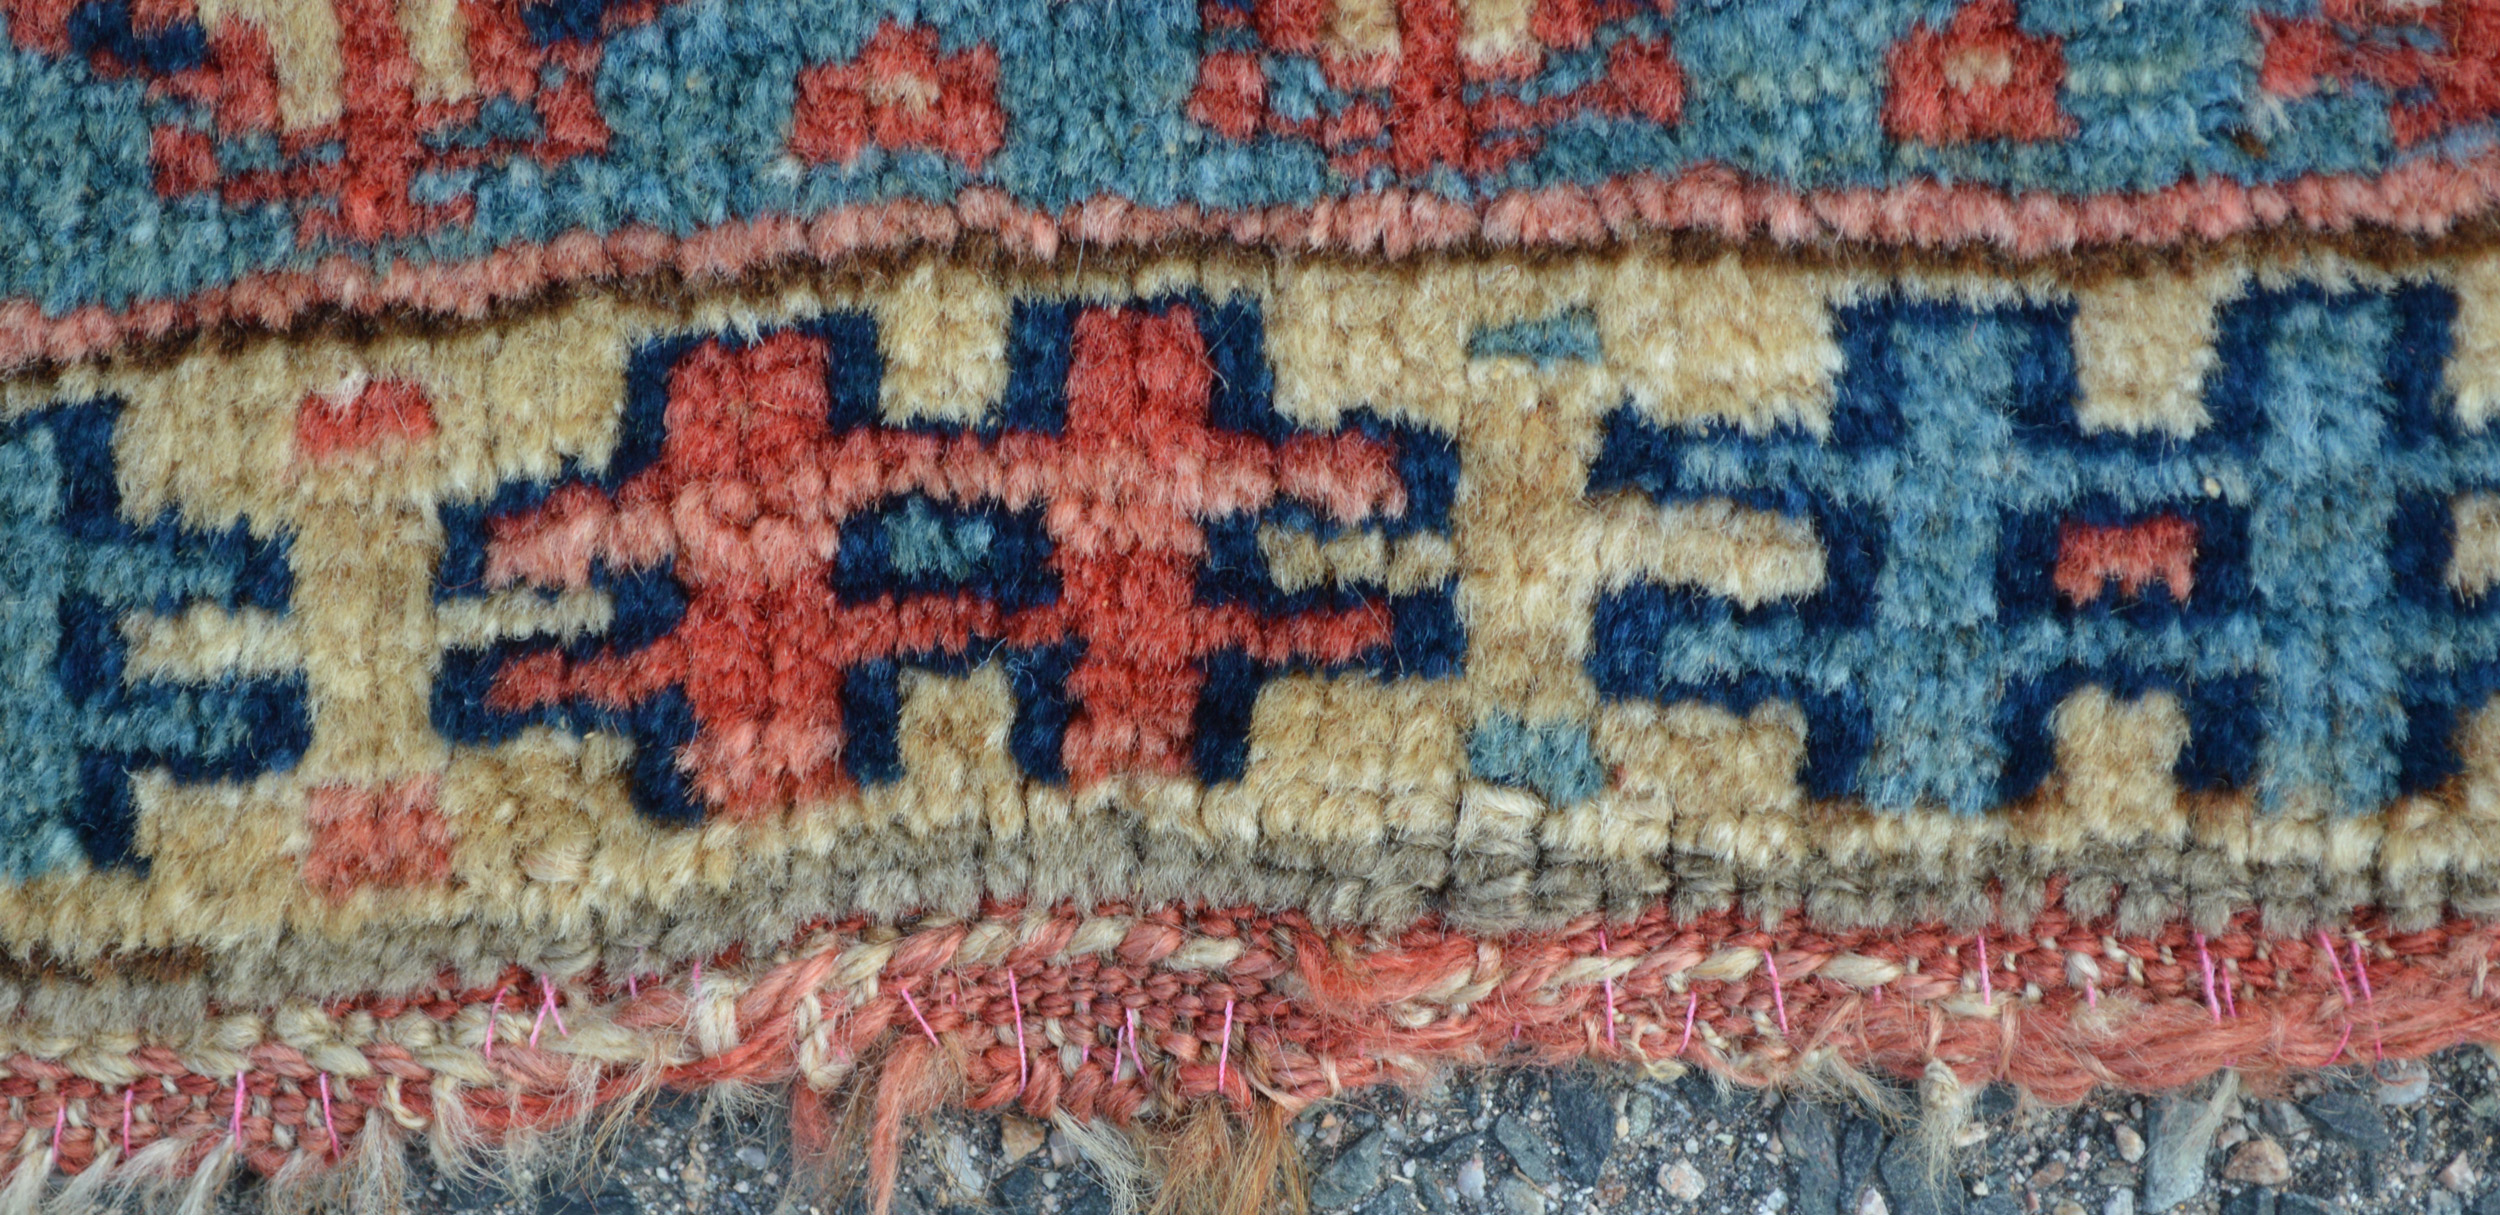 Chain stitch end finish from an antique Kurdish bag face, probably woven in the Bidjar area in northwest Persia, circa 1885